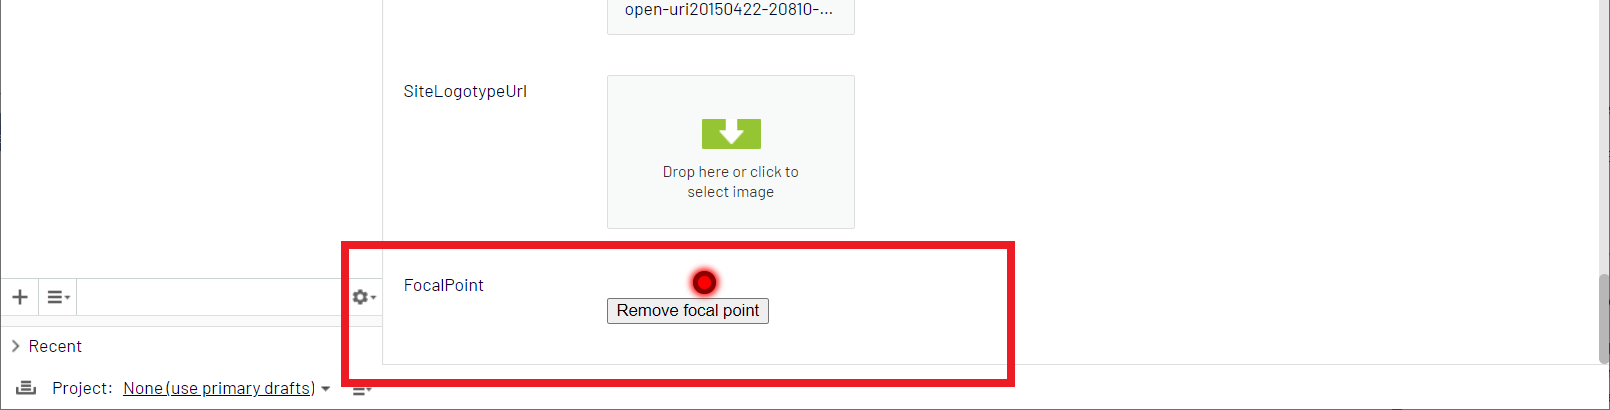 Screenshot of the focal point field not showing an image picker